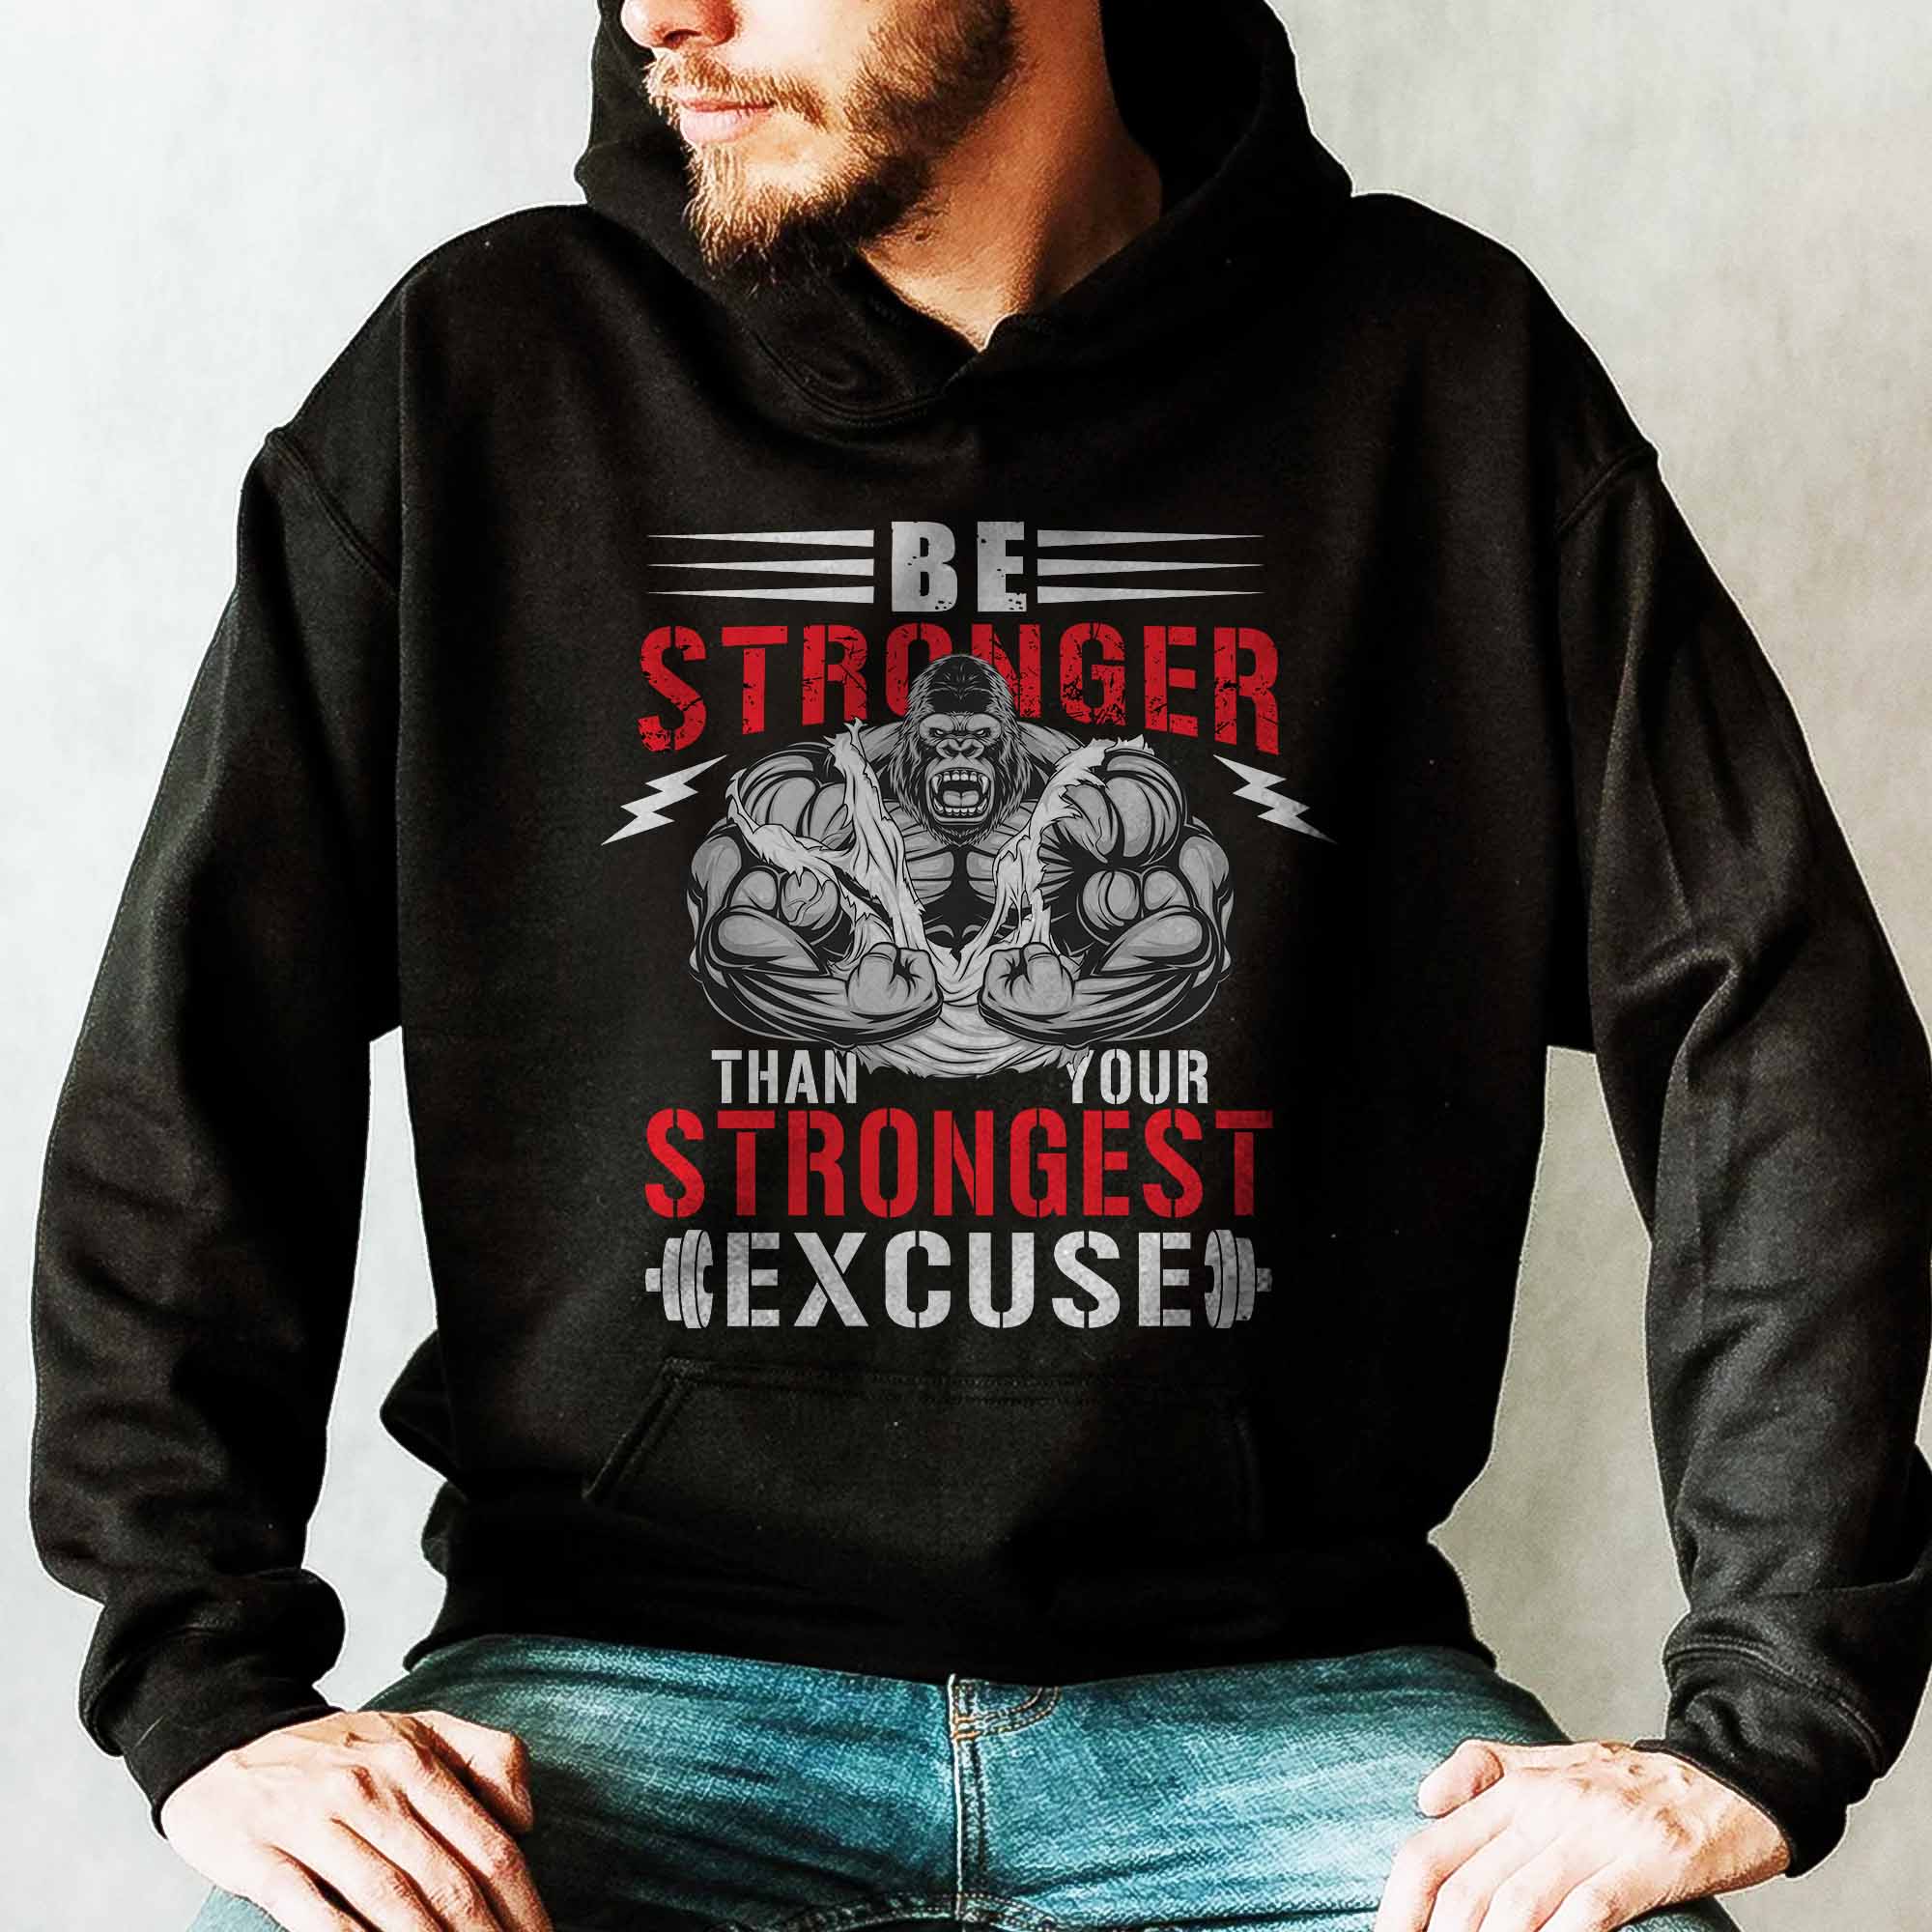 Gym Pump Cover Hoodie Muscle Gorilla Motivational Quotes Saying